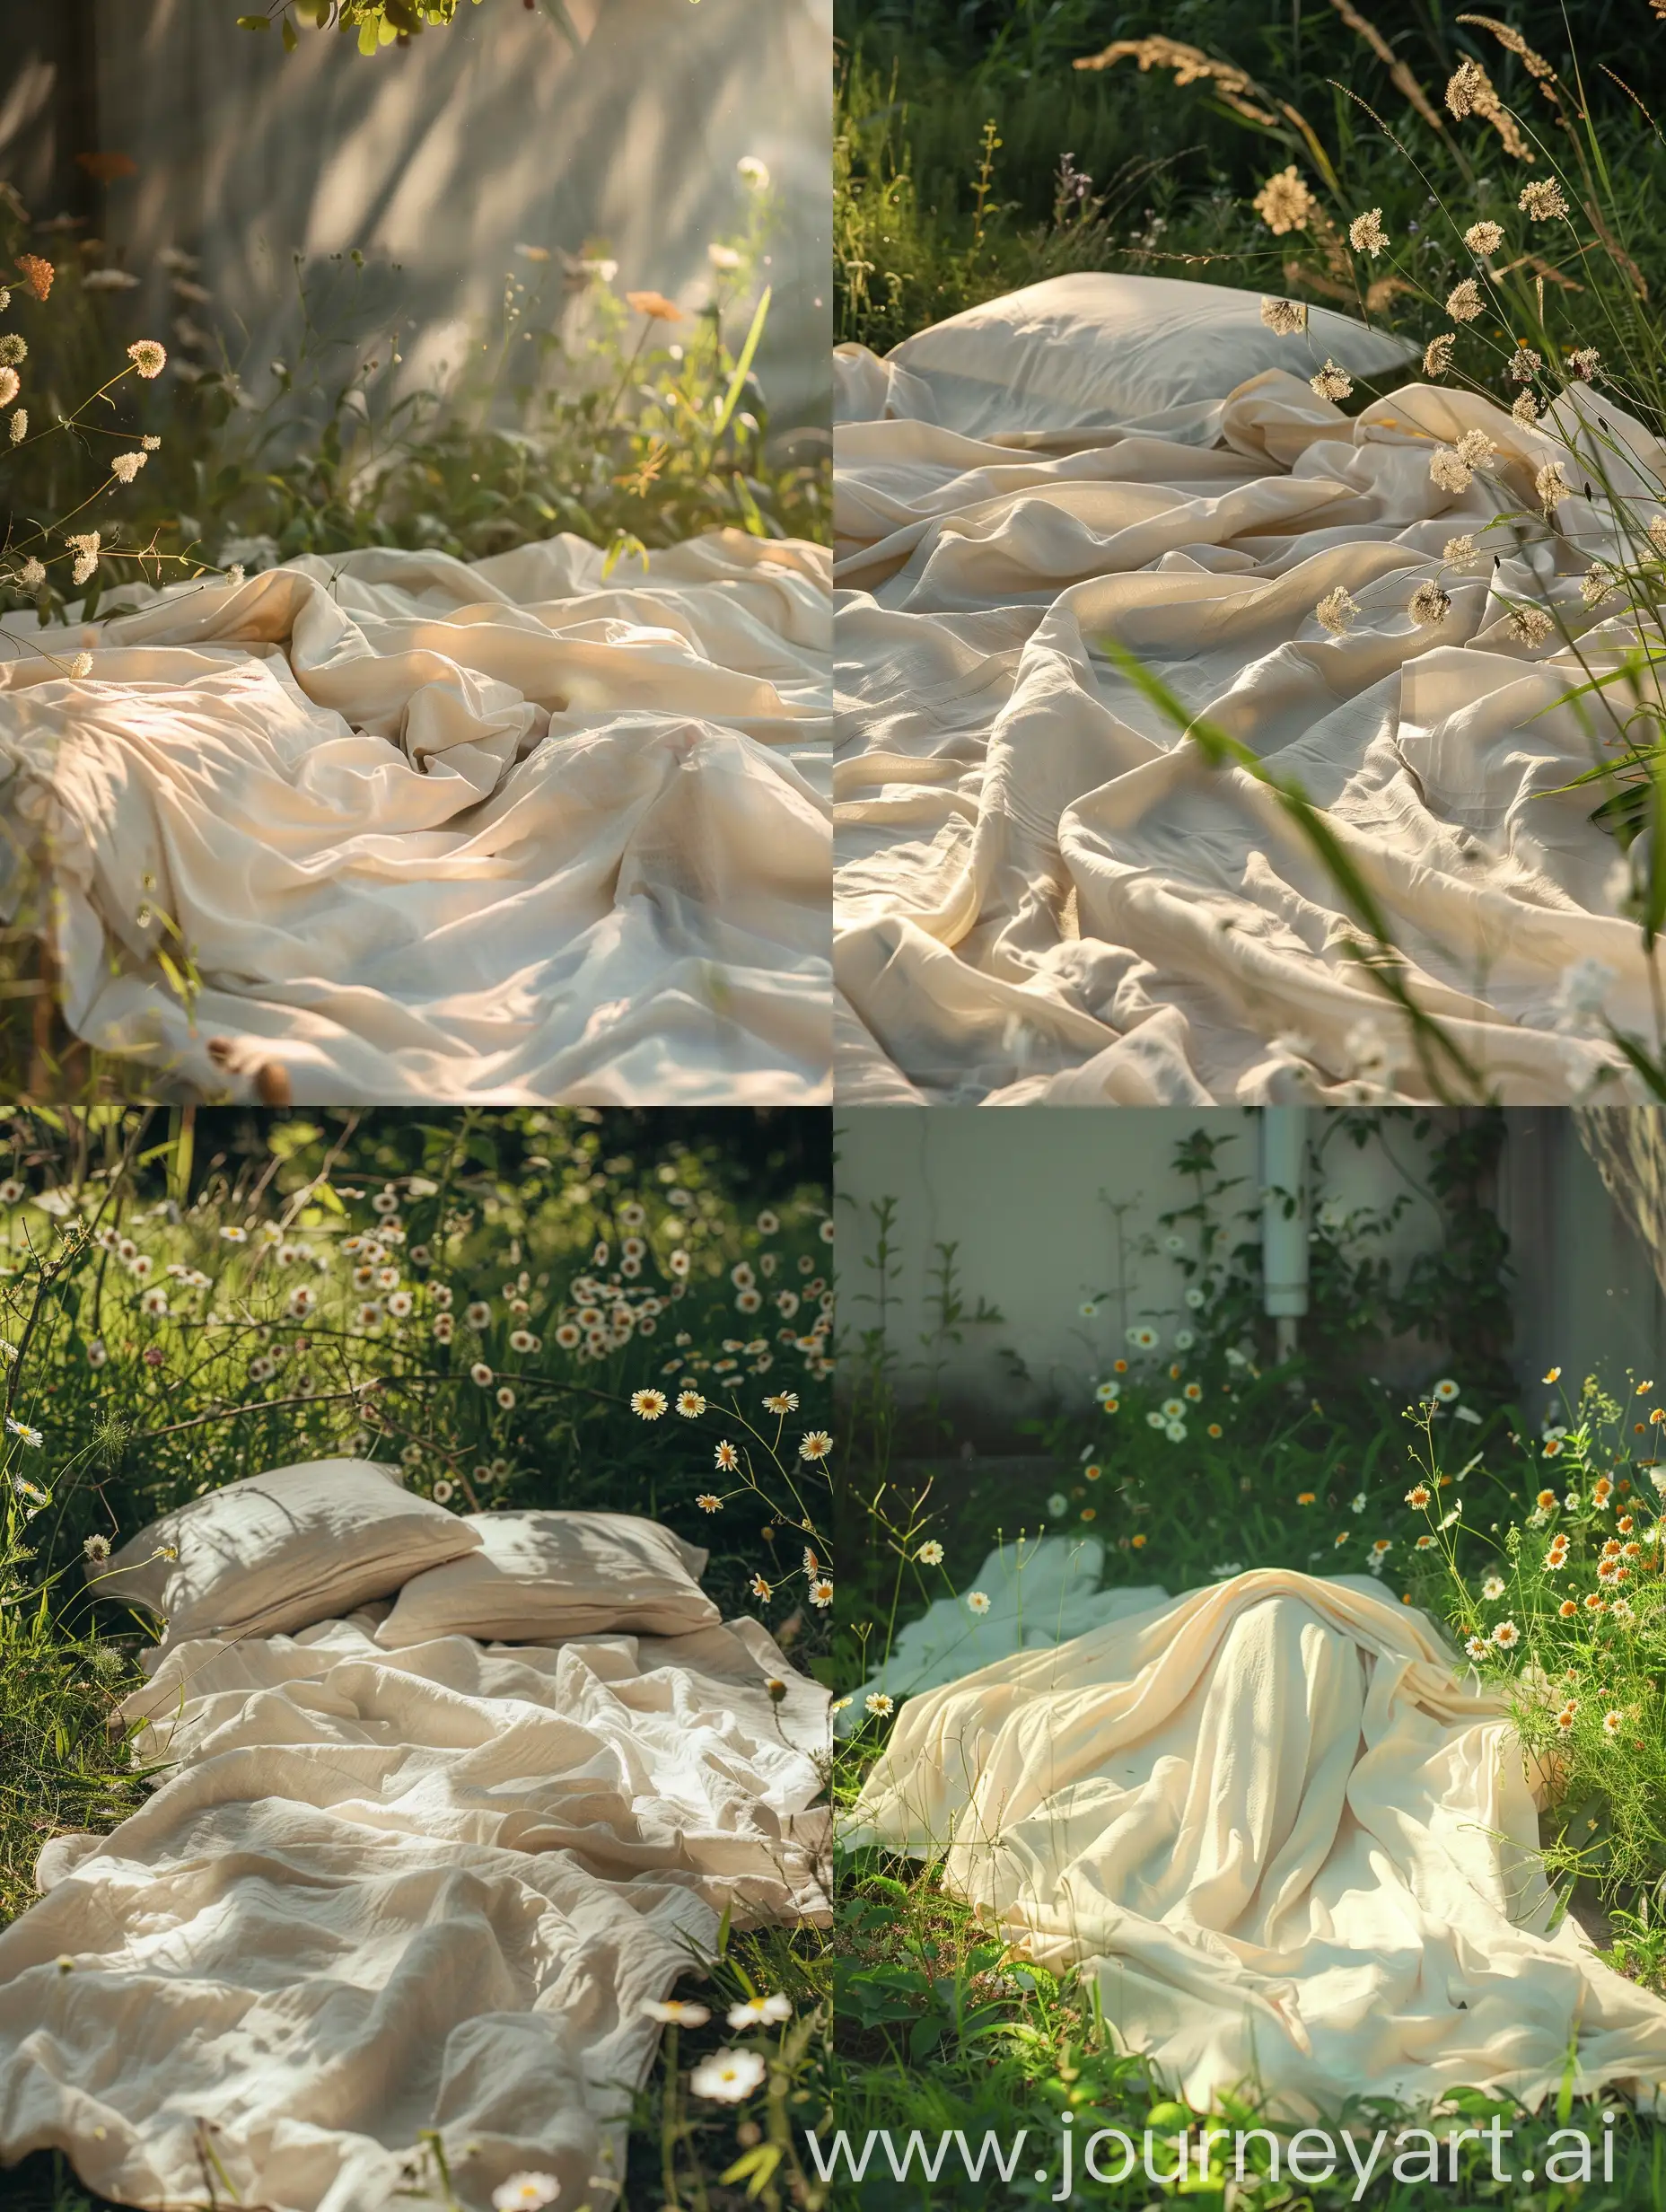 Freshly-Cleaned-Bed-Sheets-Drying-Under-Sunlight